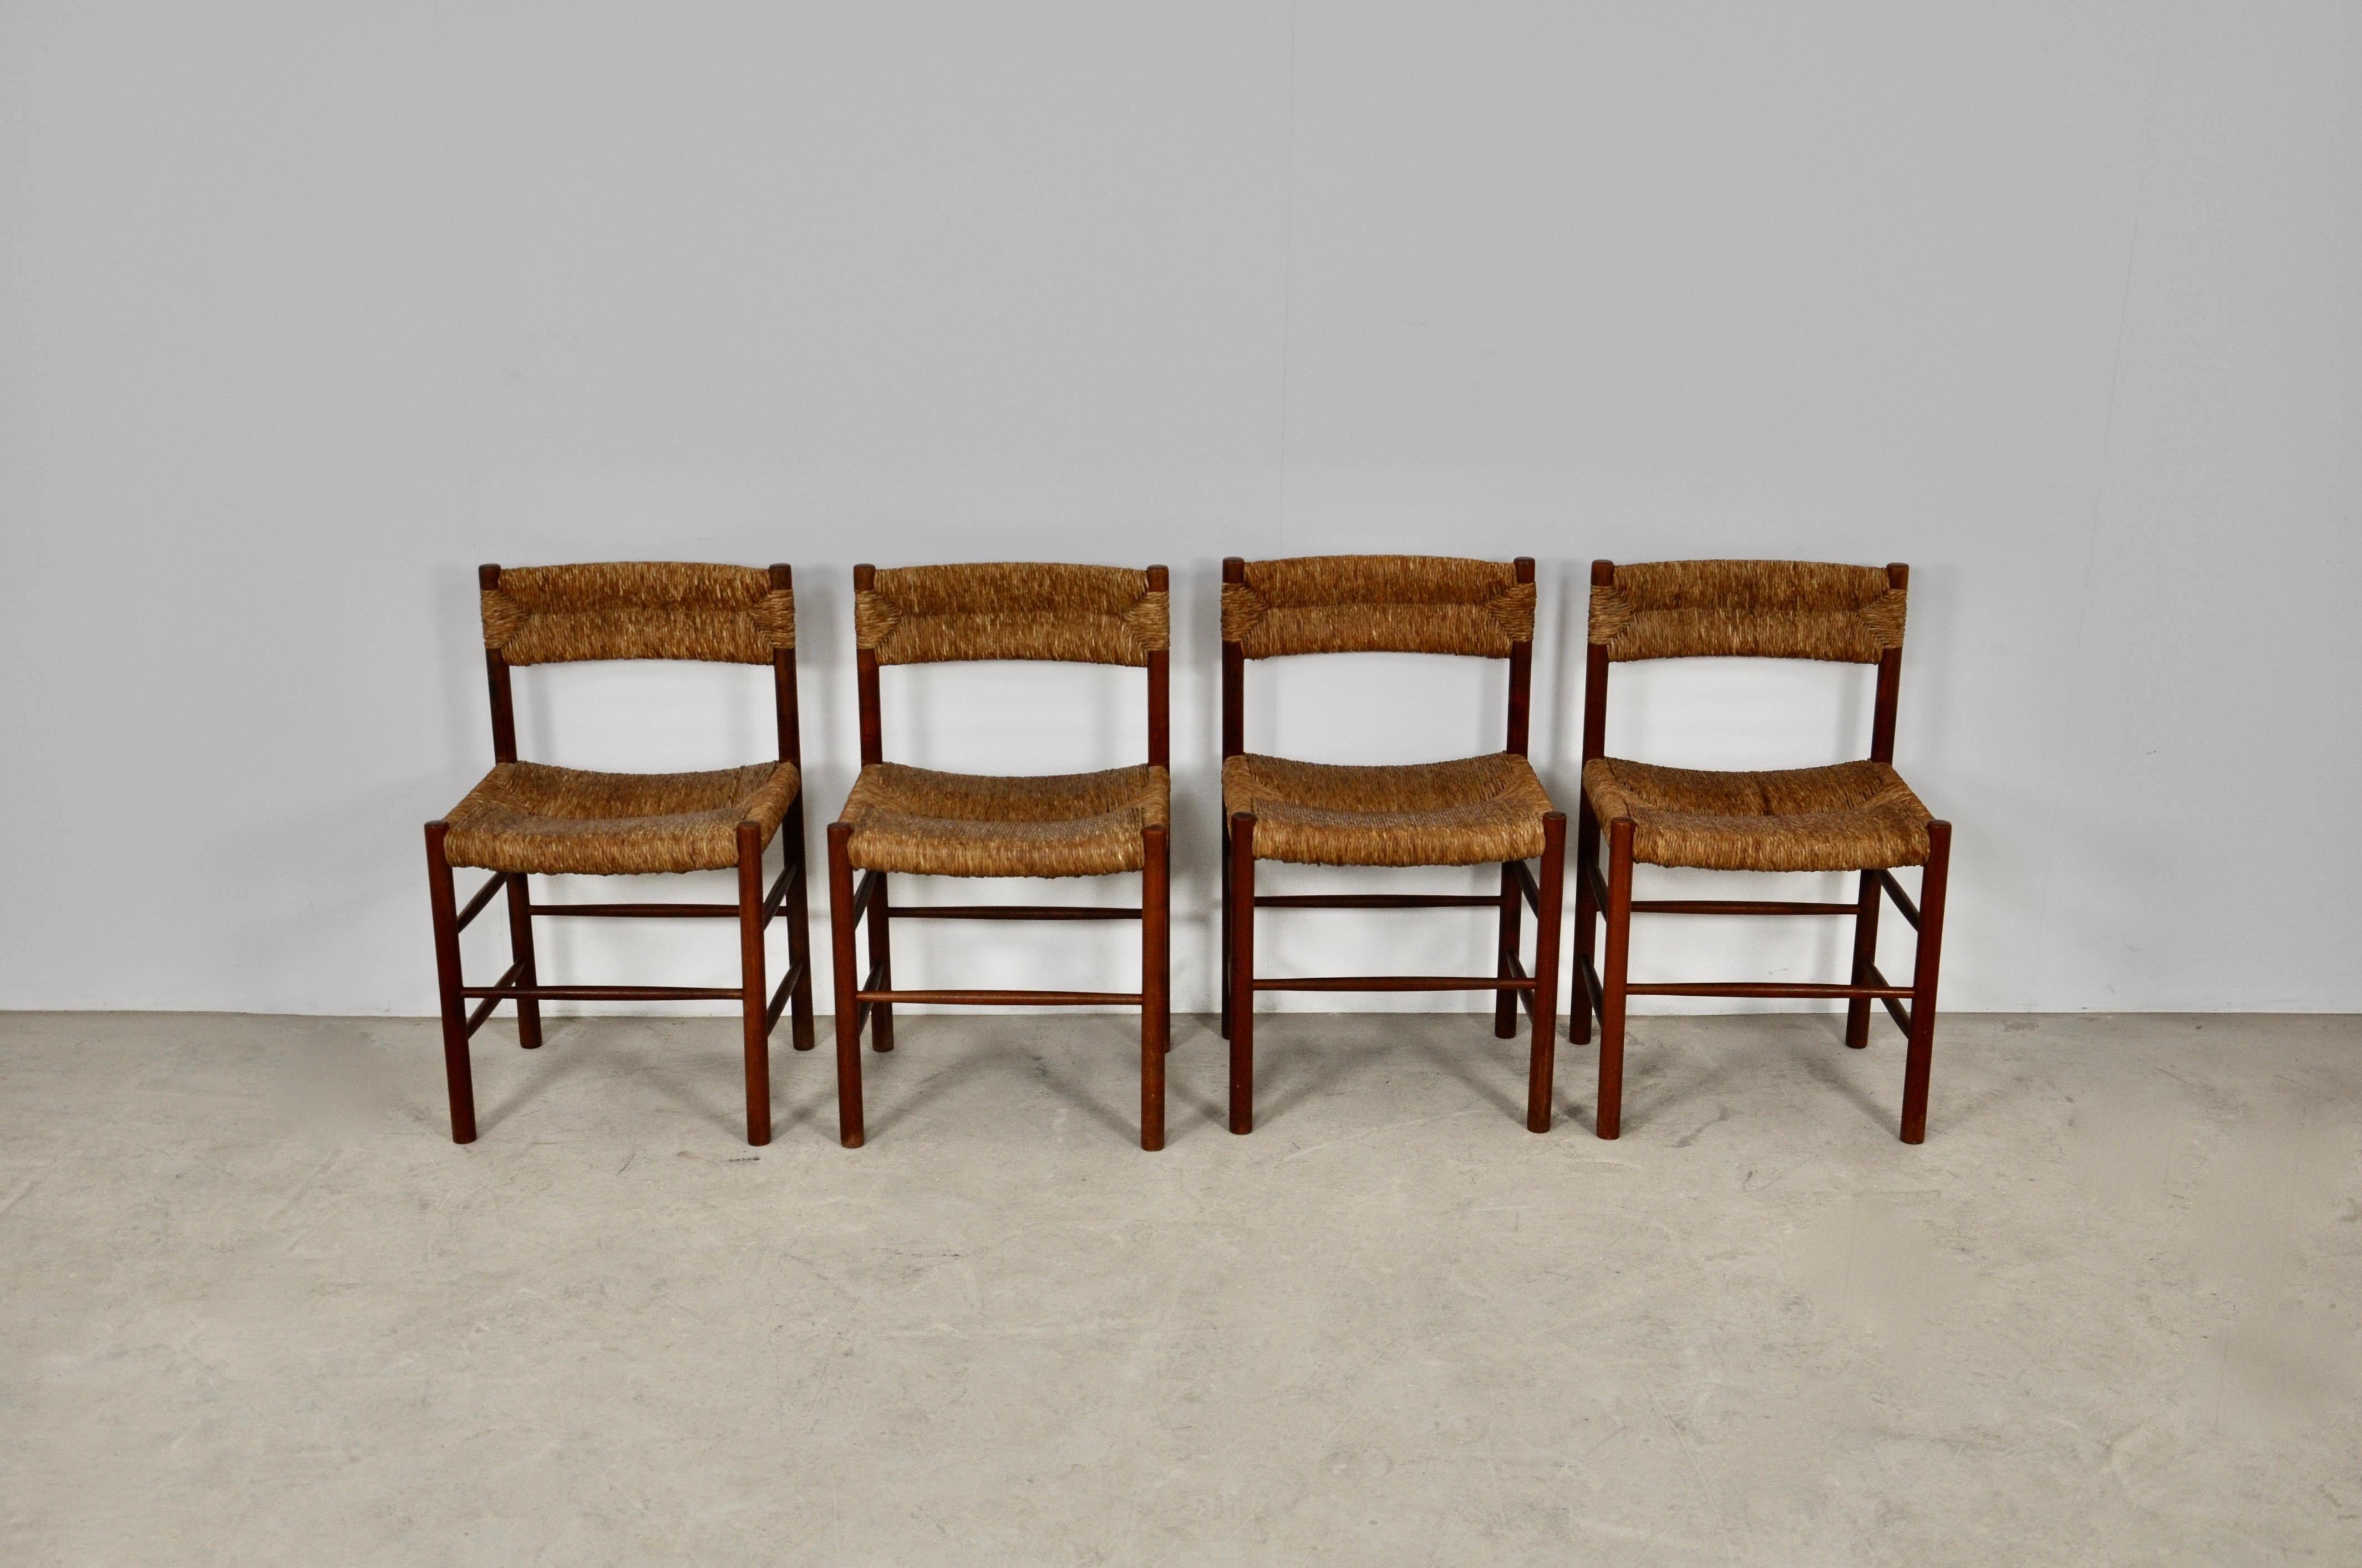 Wood and straw chair set. Seat height: 47cm. Wear due to time and age of the chairs.